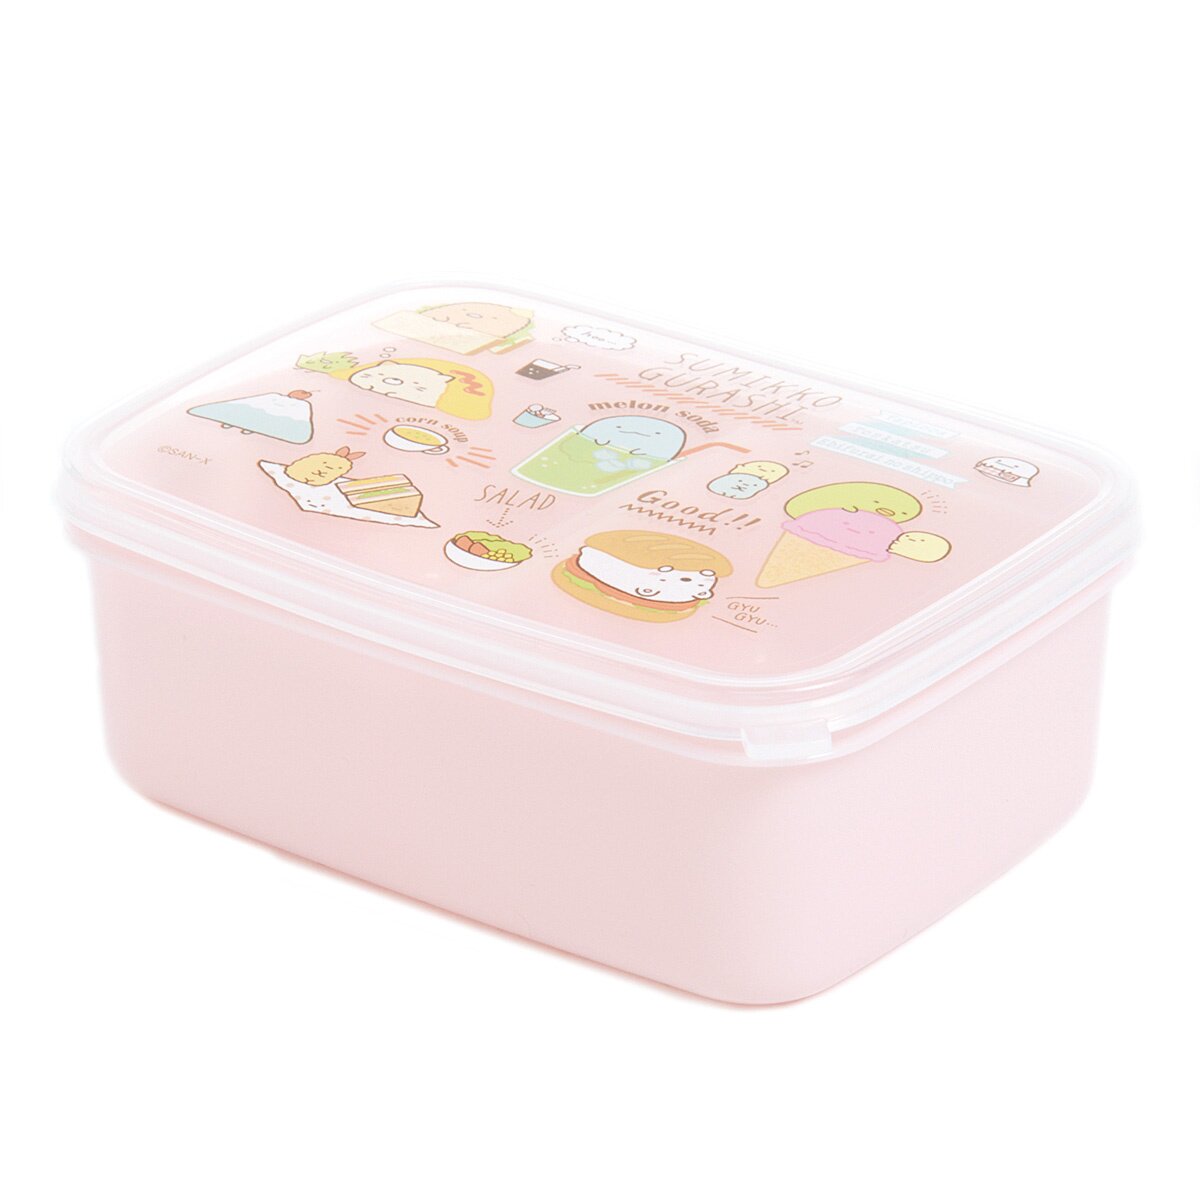 Lunchbox w. Removable Divider, Point Store